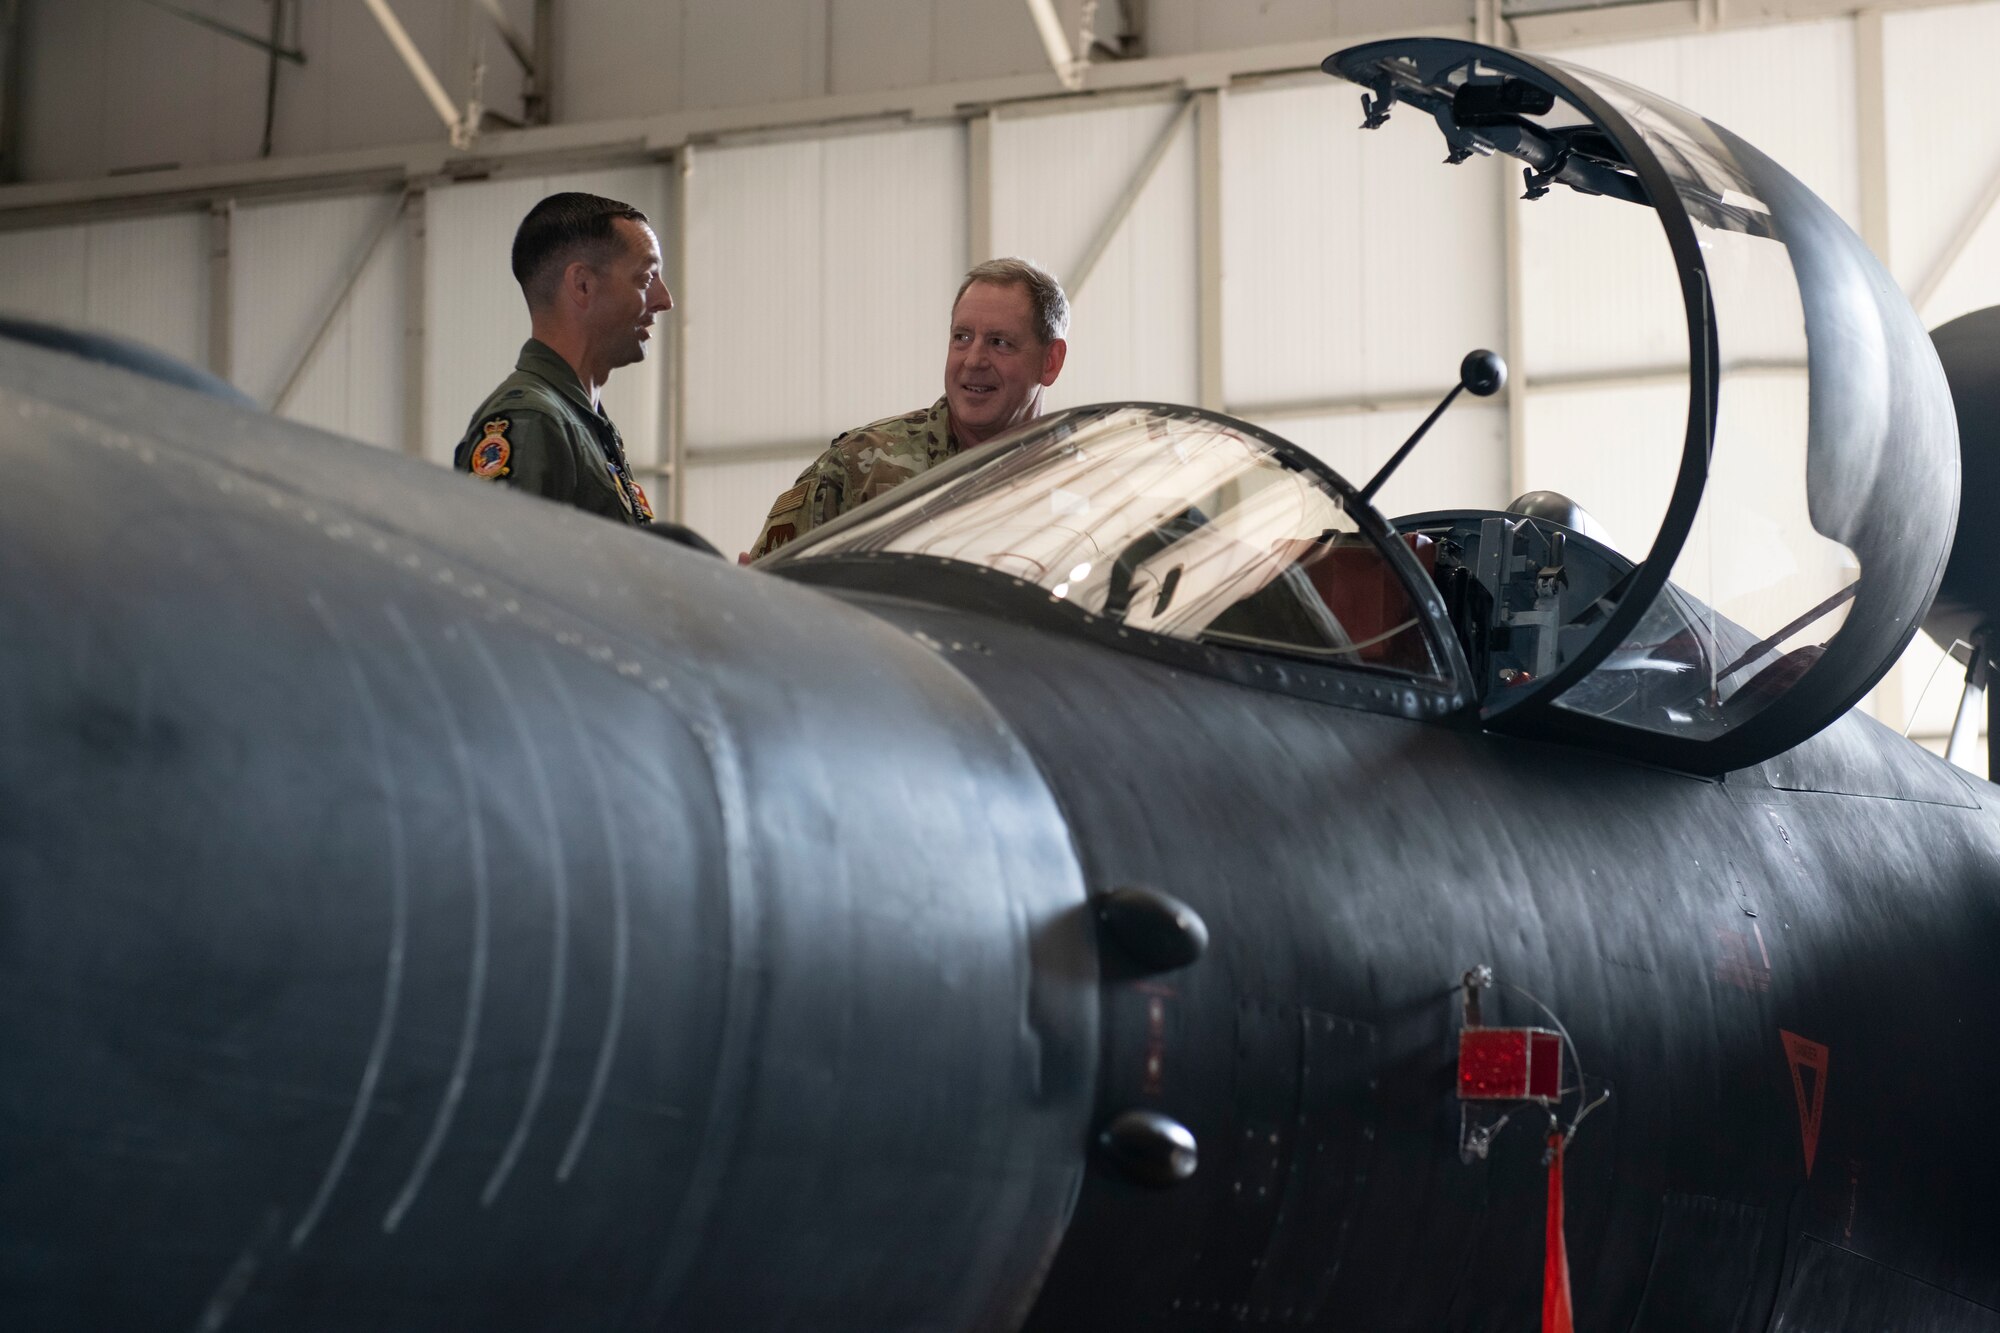 U.S. Air Force Lt. Col. Christopher “Scrat” Pridgen, left, 99th Expeditionary Reconnaissance Squadron director of operations, provides a tour of the U-2 Dragon Lady to Gen. James B. Hecker, right, U.S. Air Forces in Europe and Air Forces Africa commander, recognizes  at Royal Air Force Fairford, England, July, 18, 2022. During his first visit to the 501st Combat Support Wing as the USAFE-AFAFRICA commander, Hecker met with several Airmen and received briefings about the wing’s mission and capabilities. (U.S. Air Force photo by Senior Airman Jennifer Zima)